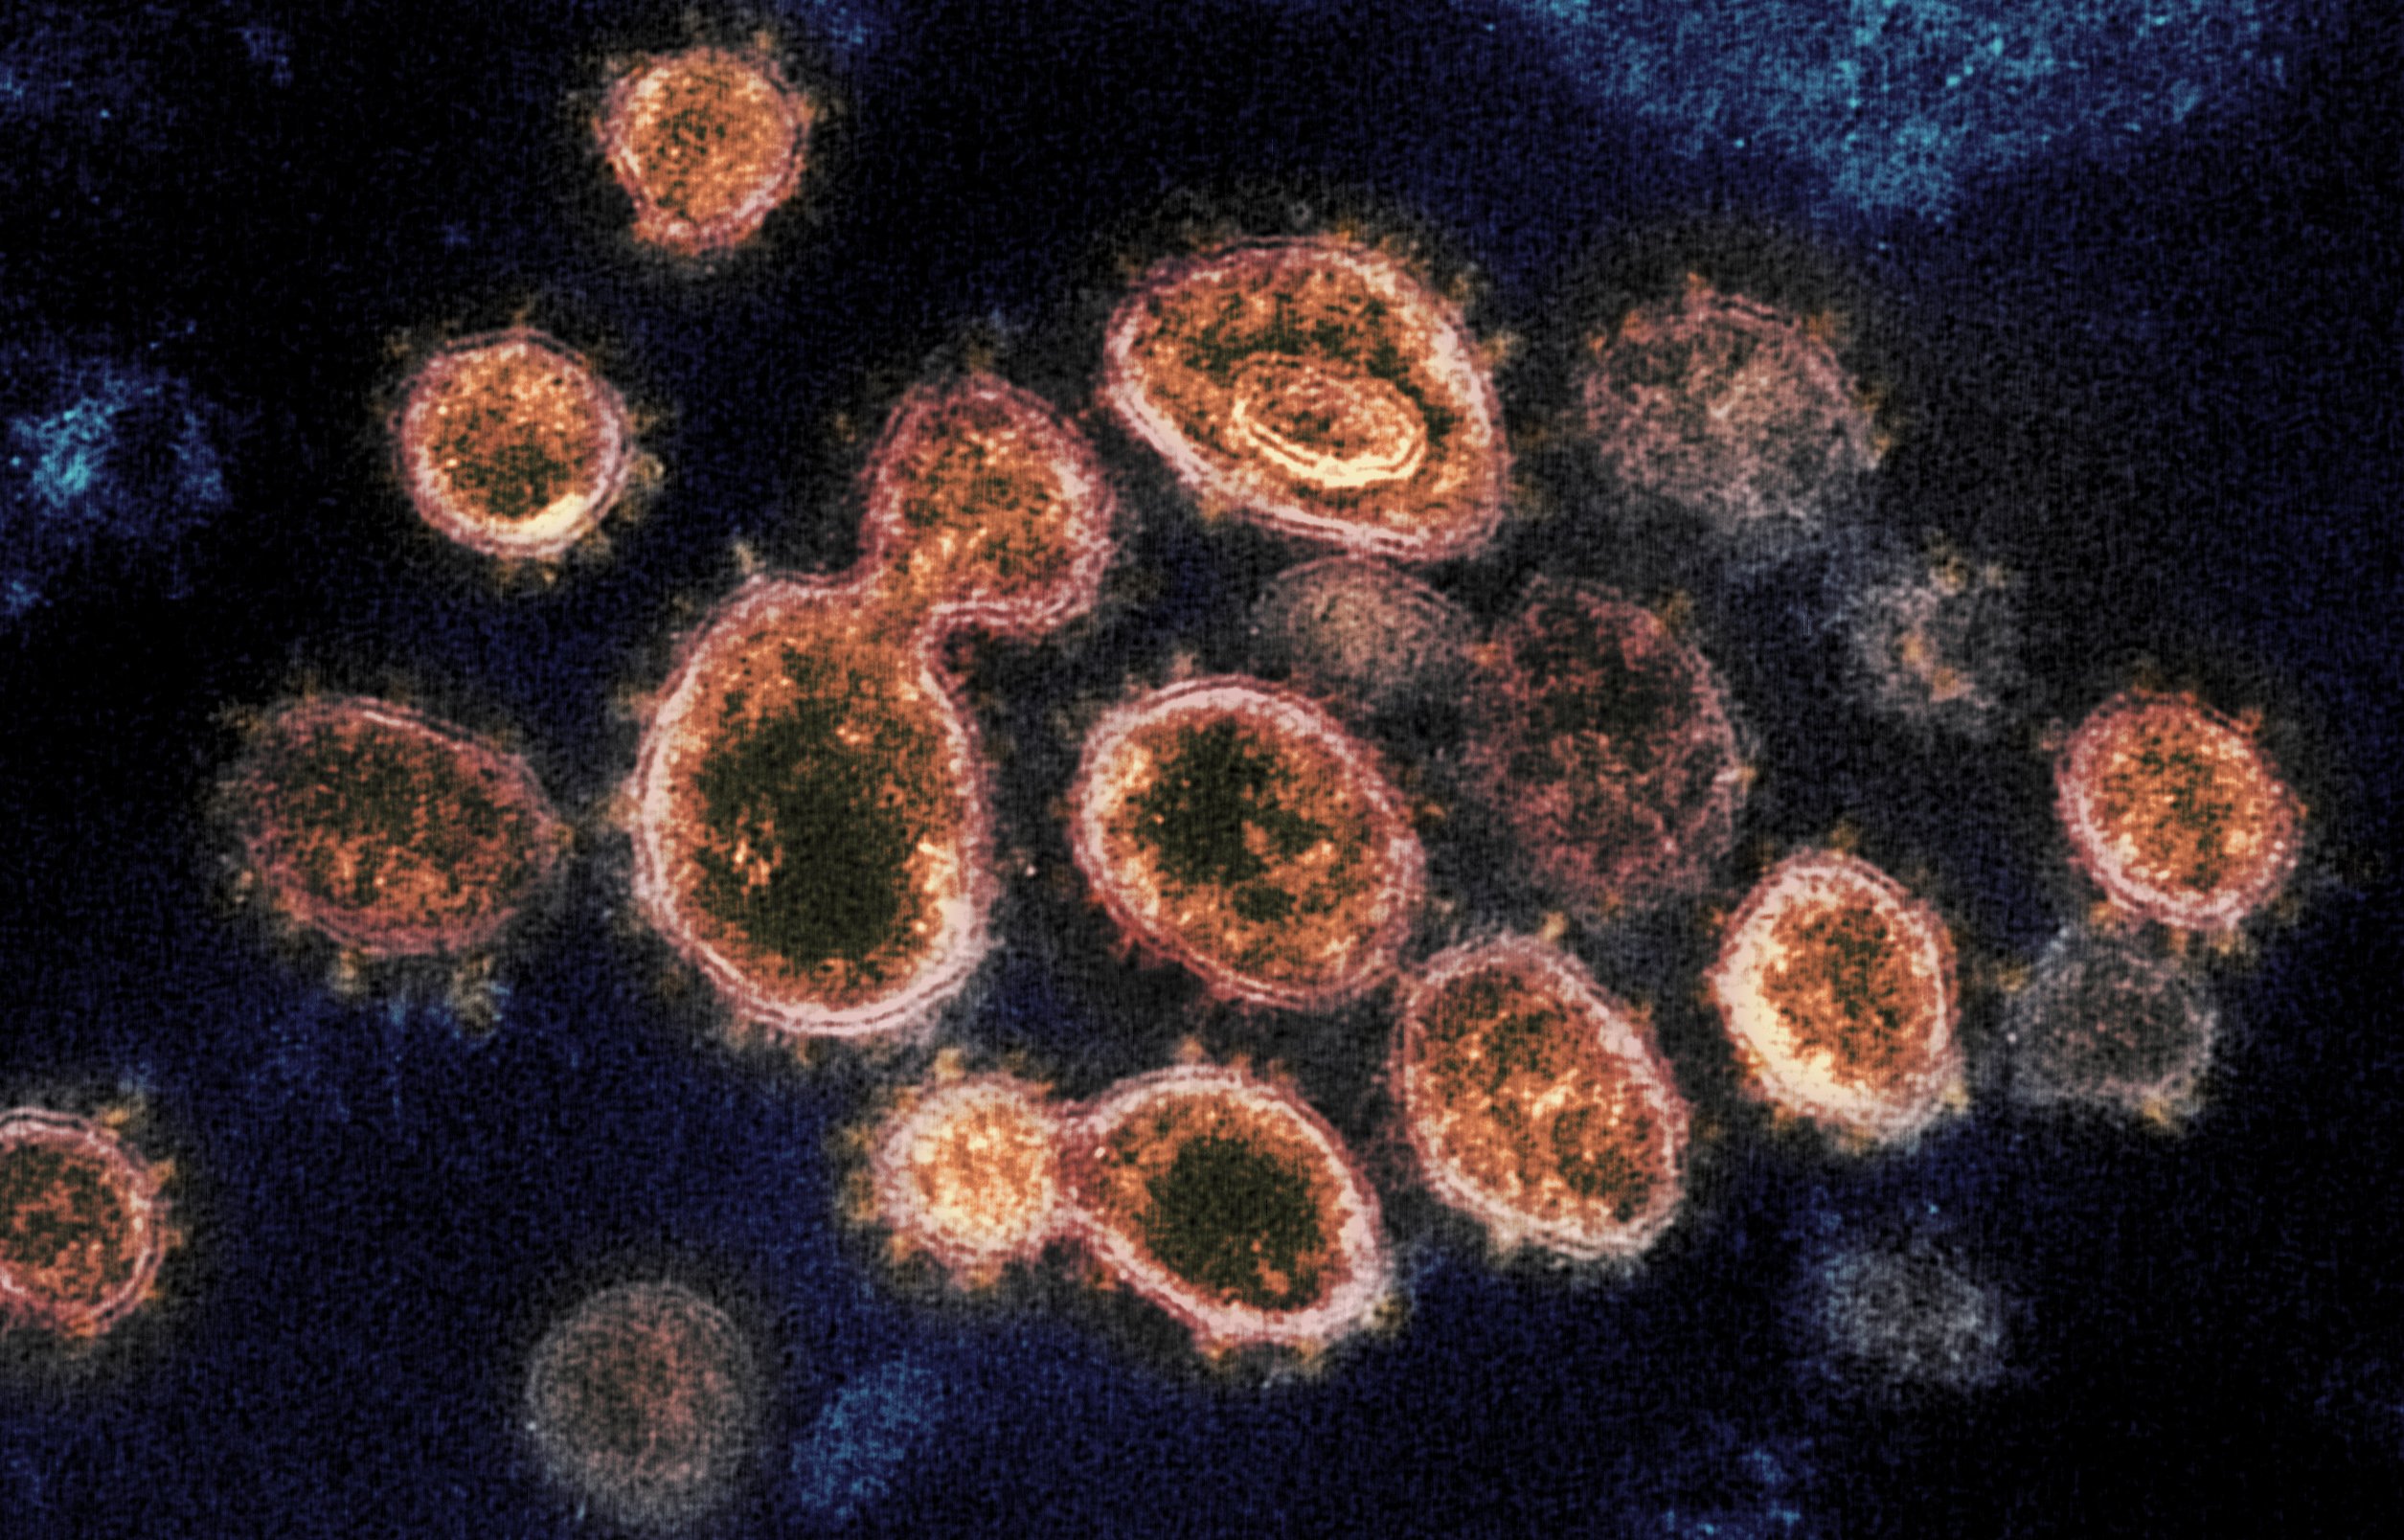 CDC says coronavirus can spread indoors in updated guidance